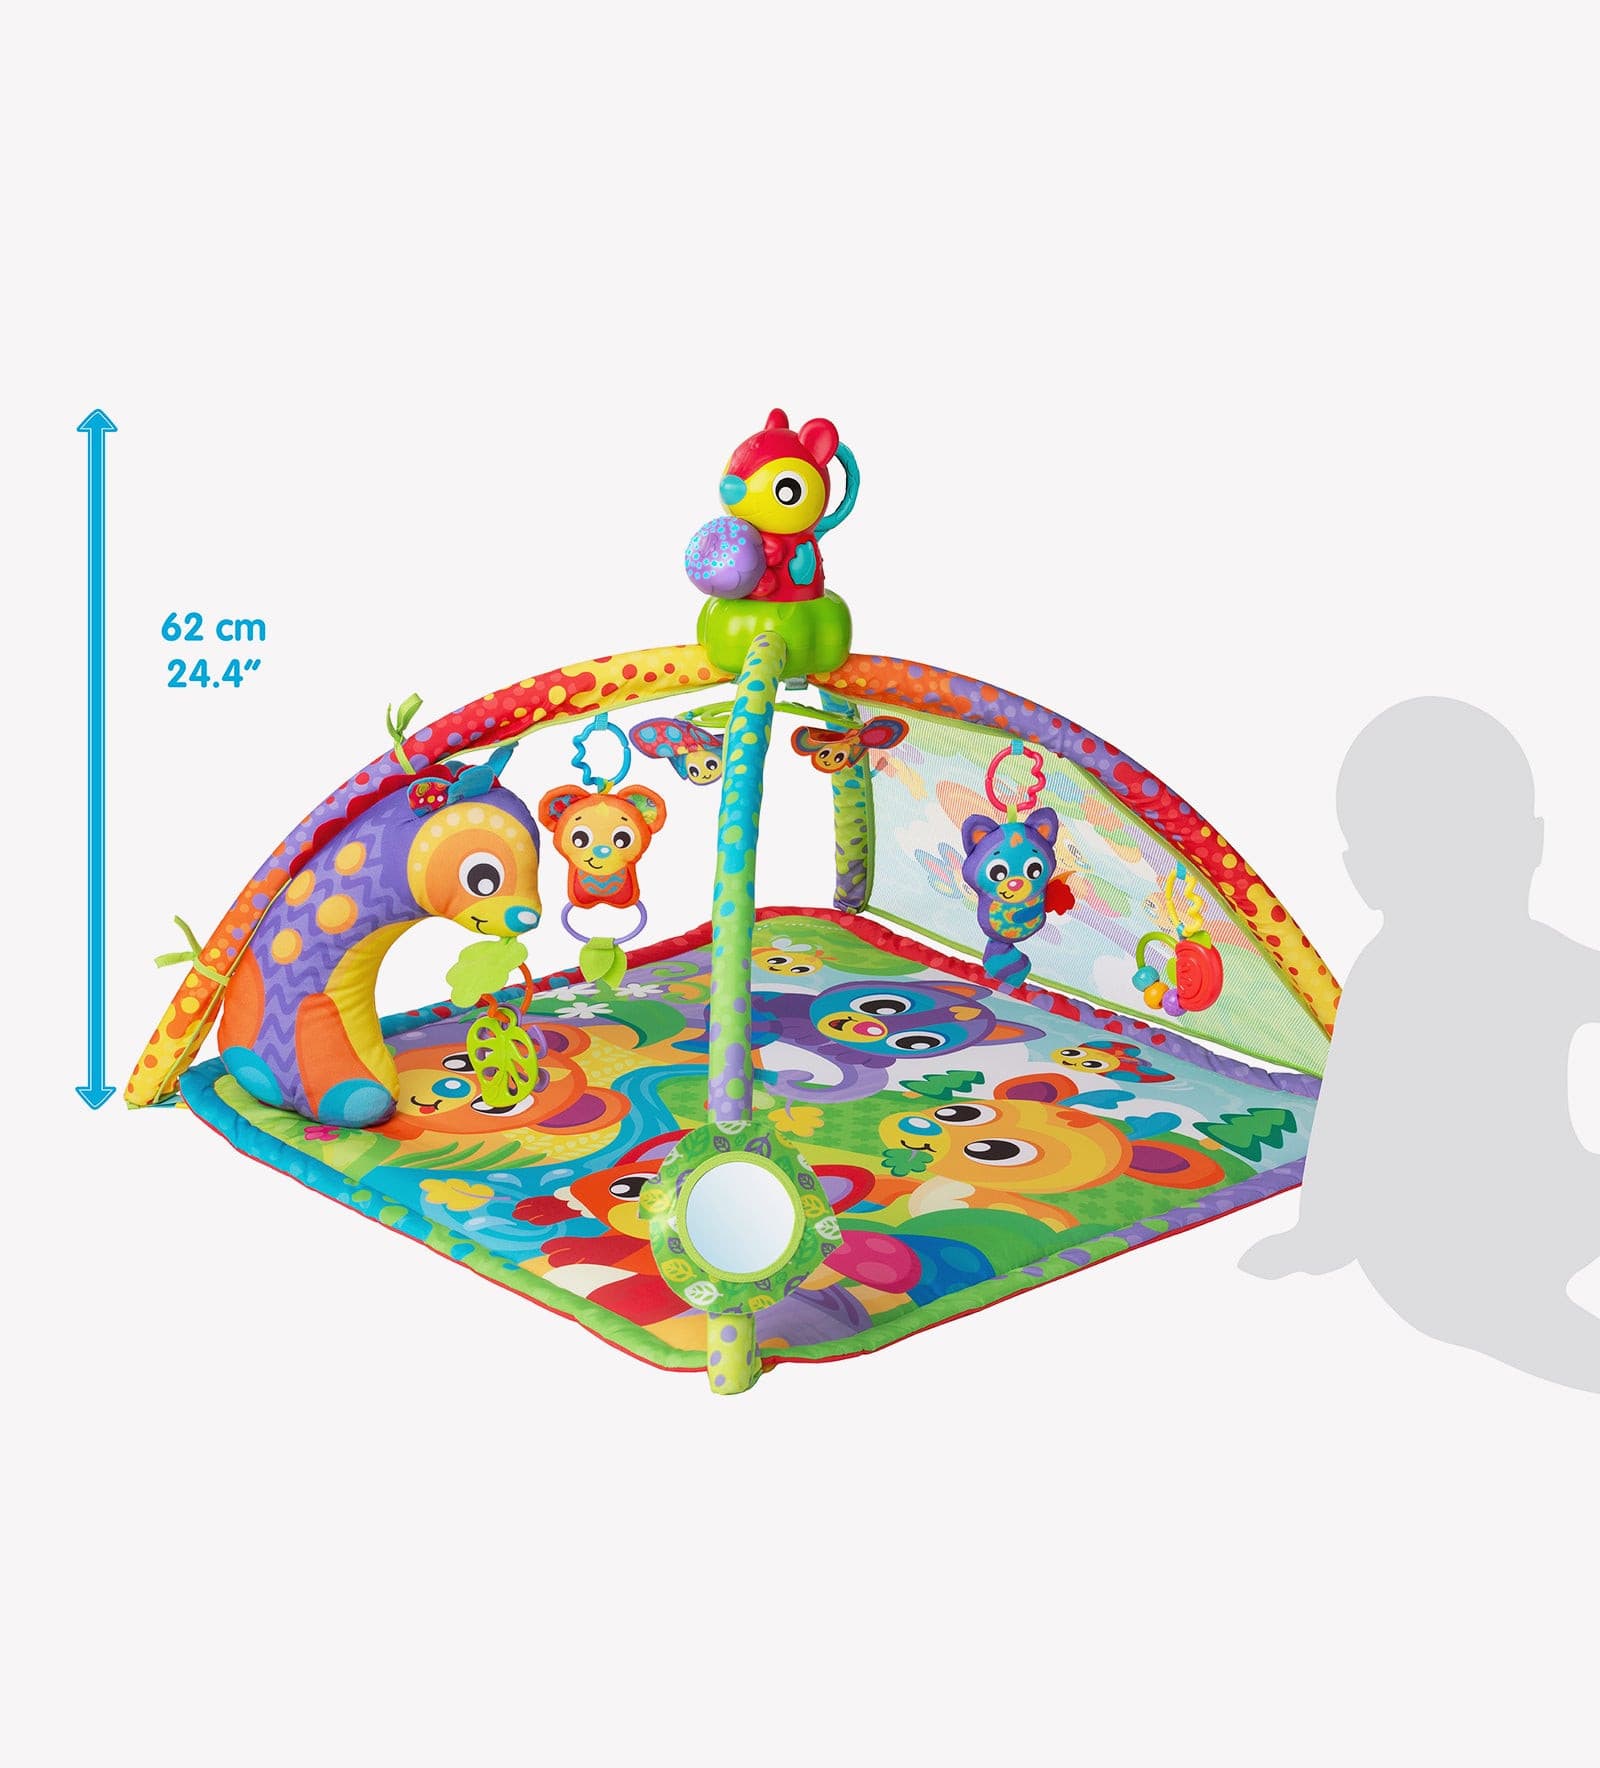 Woodlands Music And Lights Projector Gym - 3 Modes by Playgro.